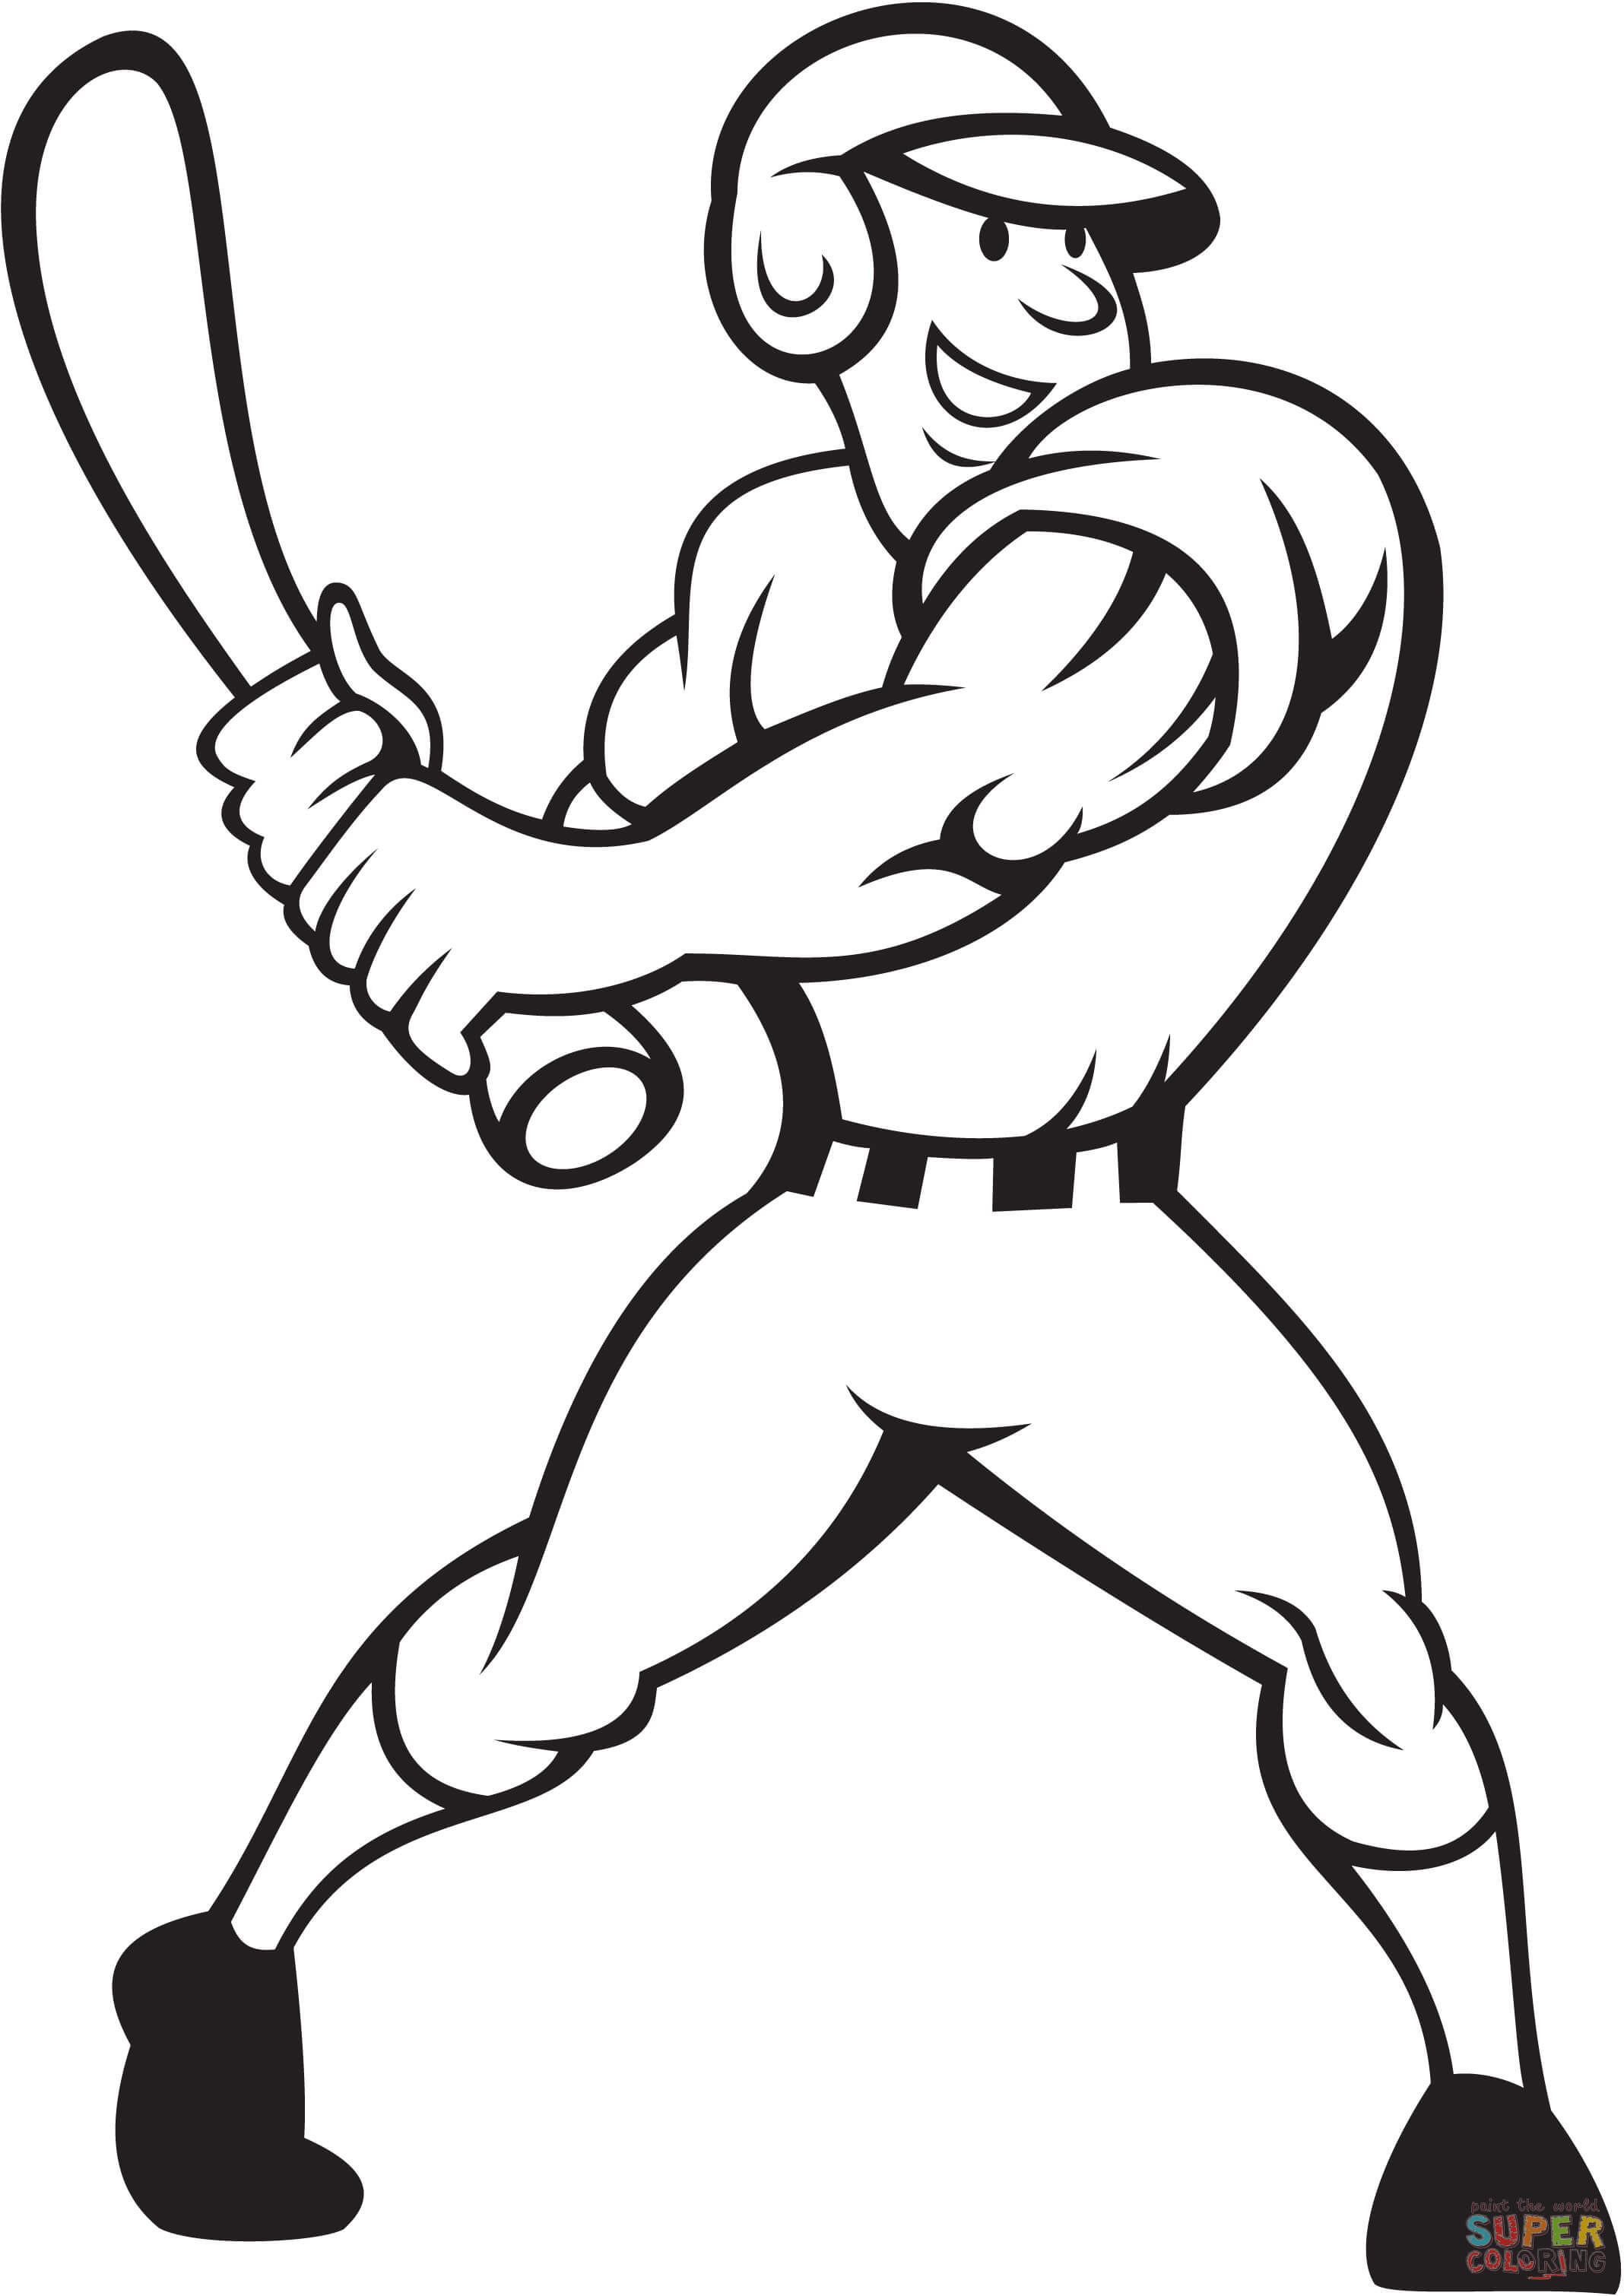 Baseball Player Batting Side coloring page | Free Printable Coloring Pages